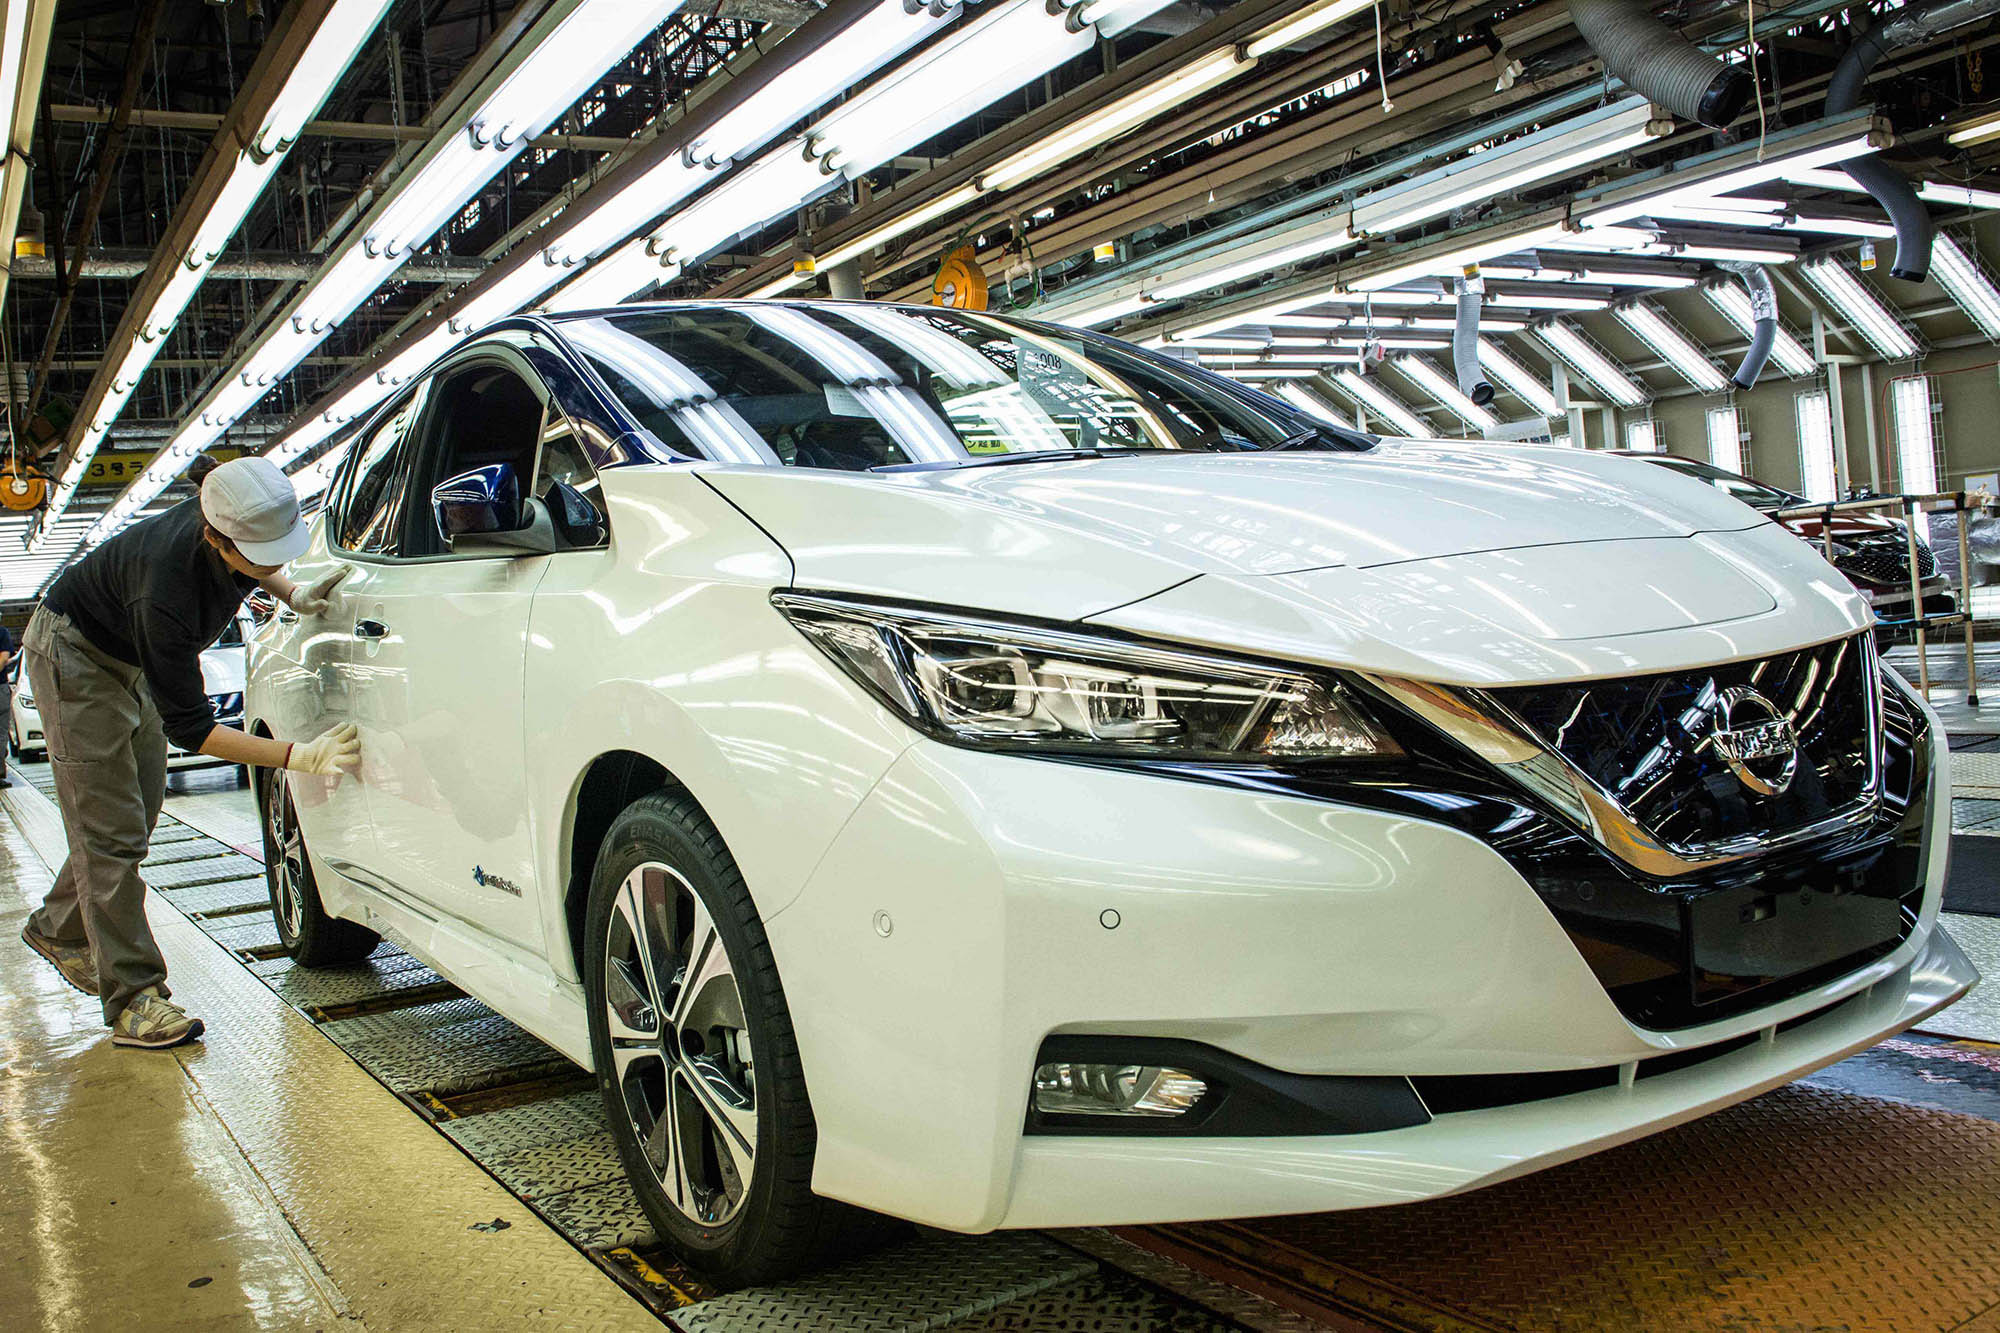  Investing in the UK - The New Nissan LEAF to be built in Sunderland